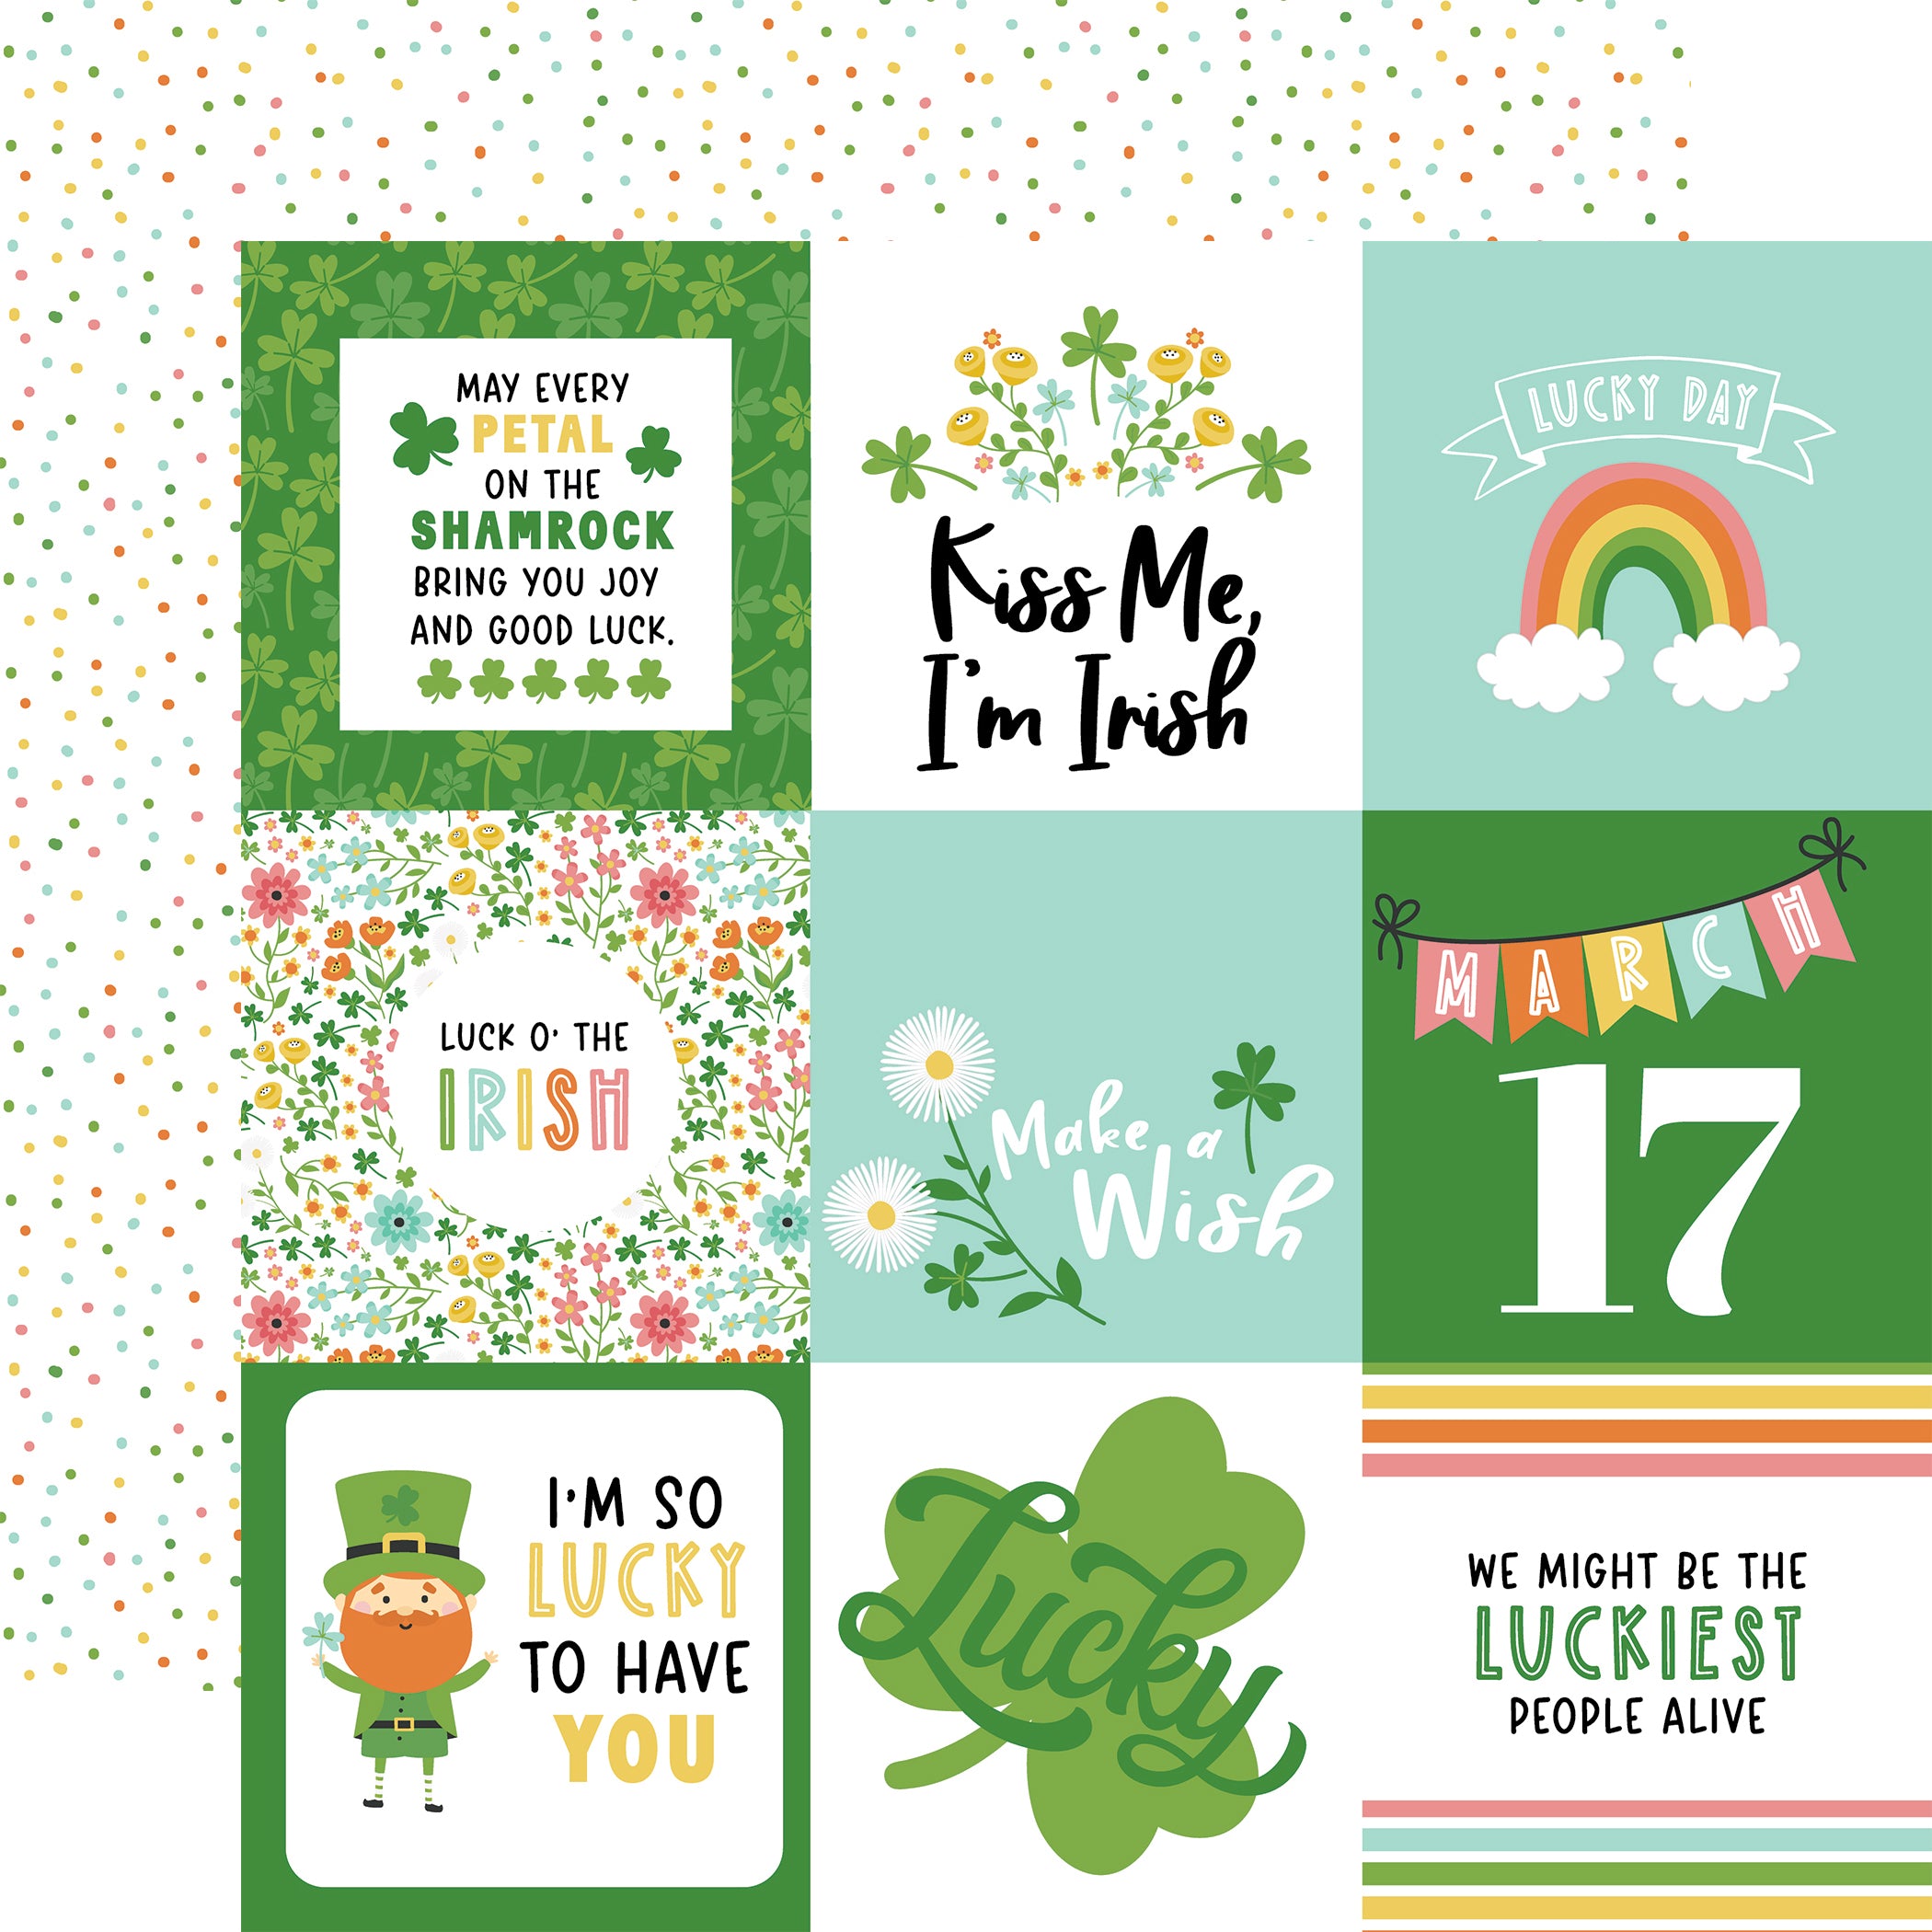 Happy St. Patrick's Day Collection 12 x 12 Scrapbook Collection Kit by Echo Park Paper